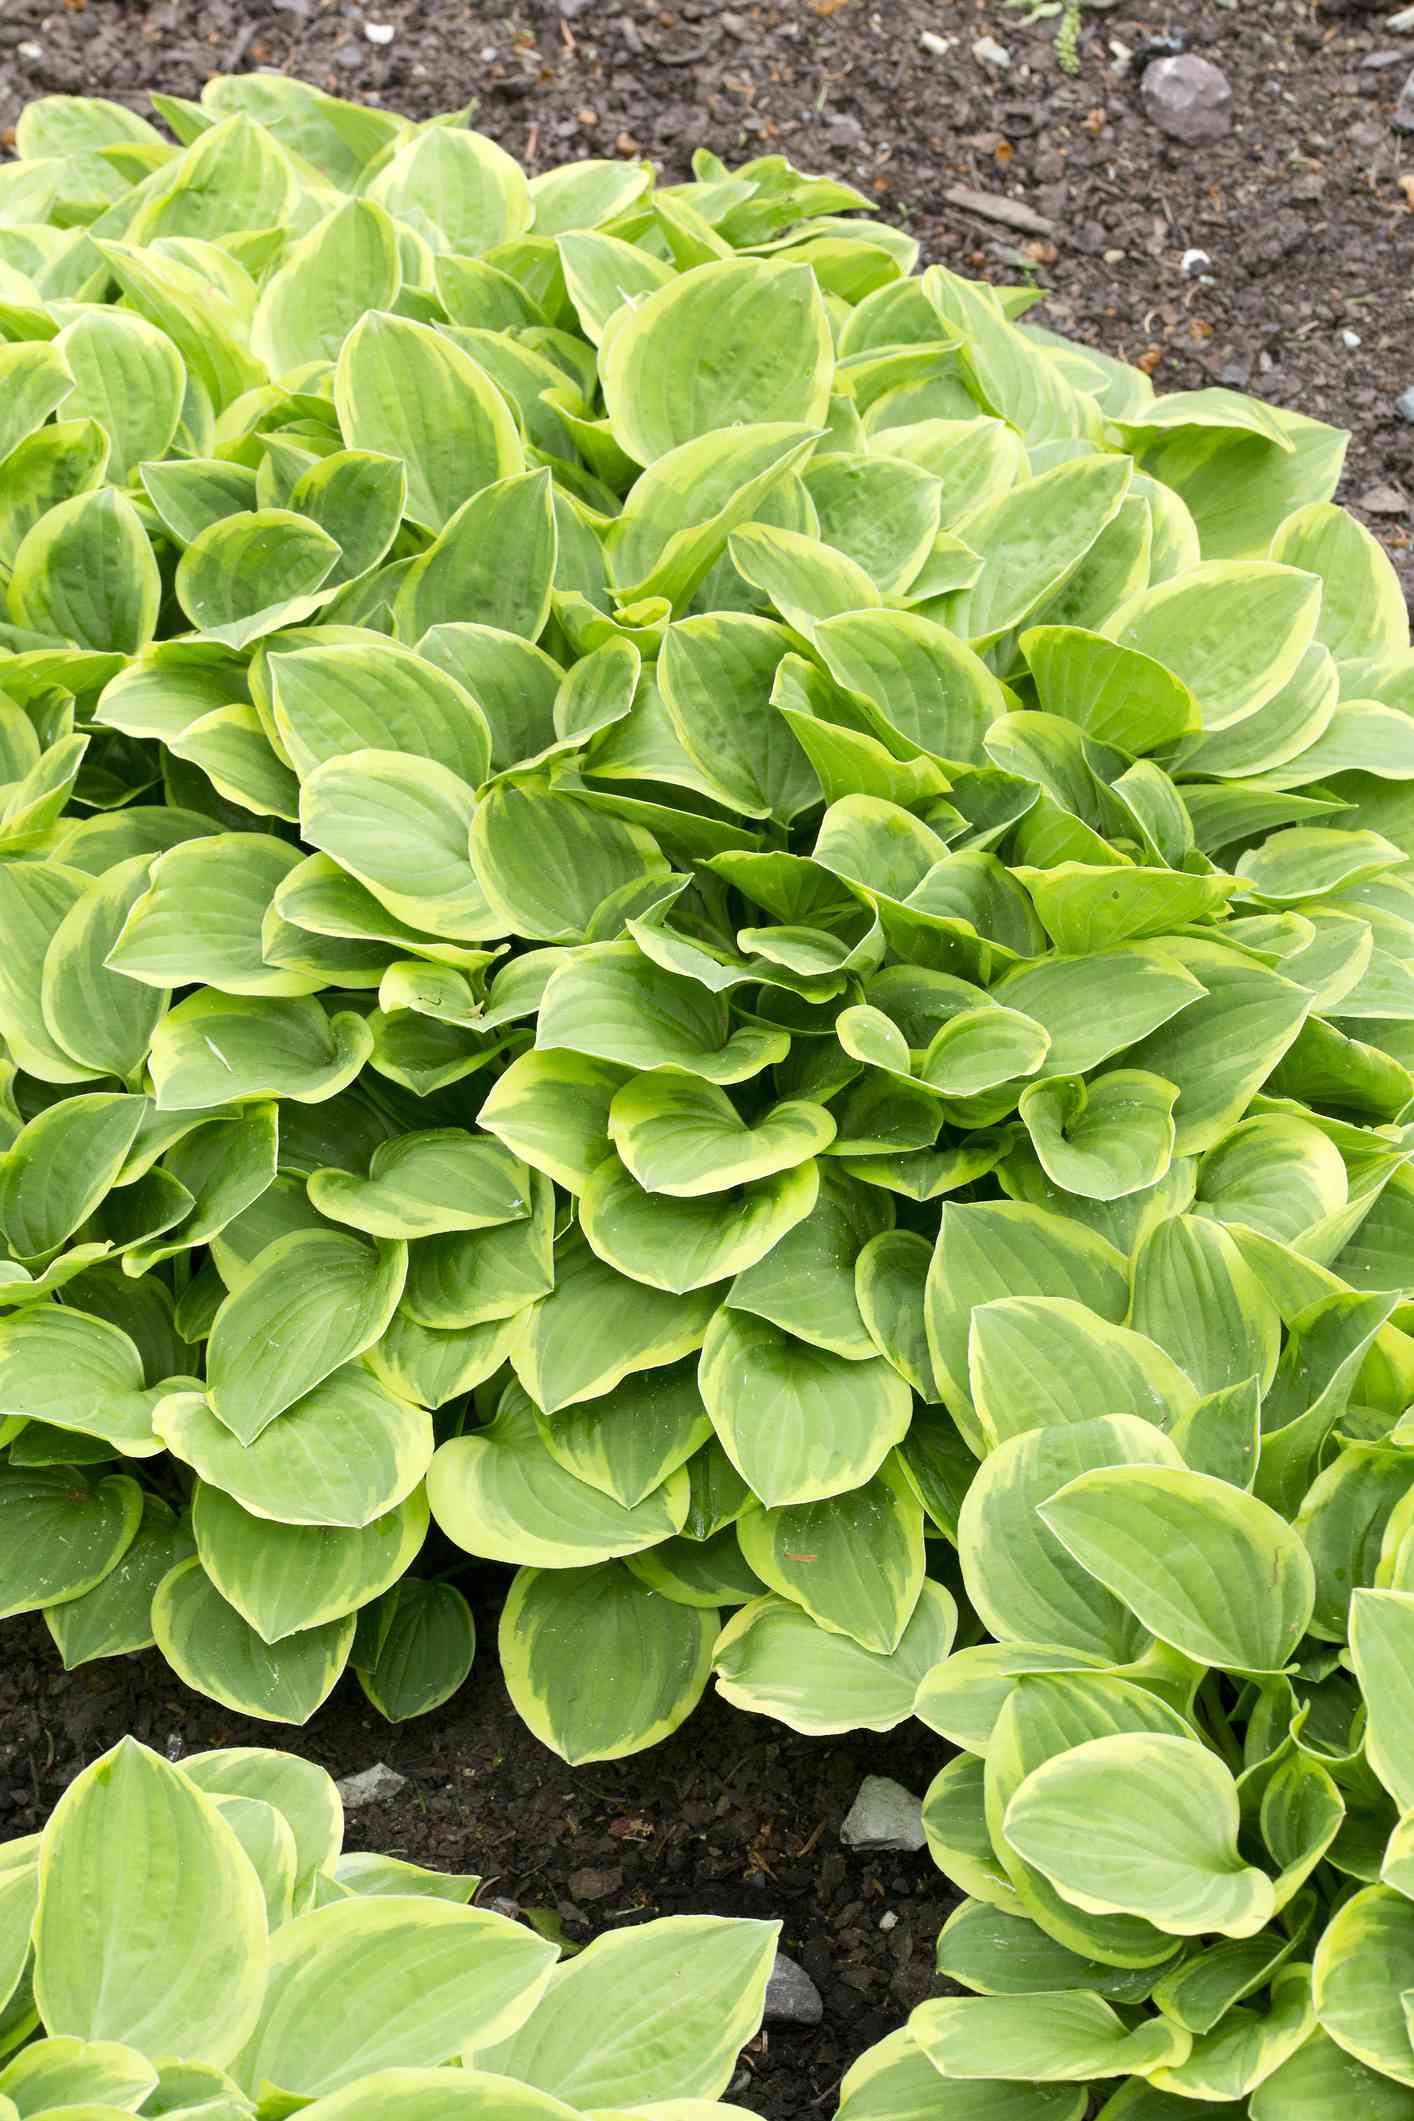 'Golden Tiara' hosta with green-and-yellow leaves